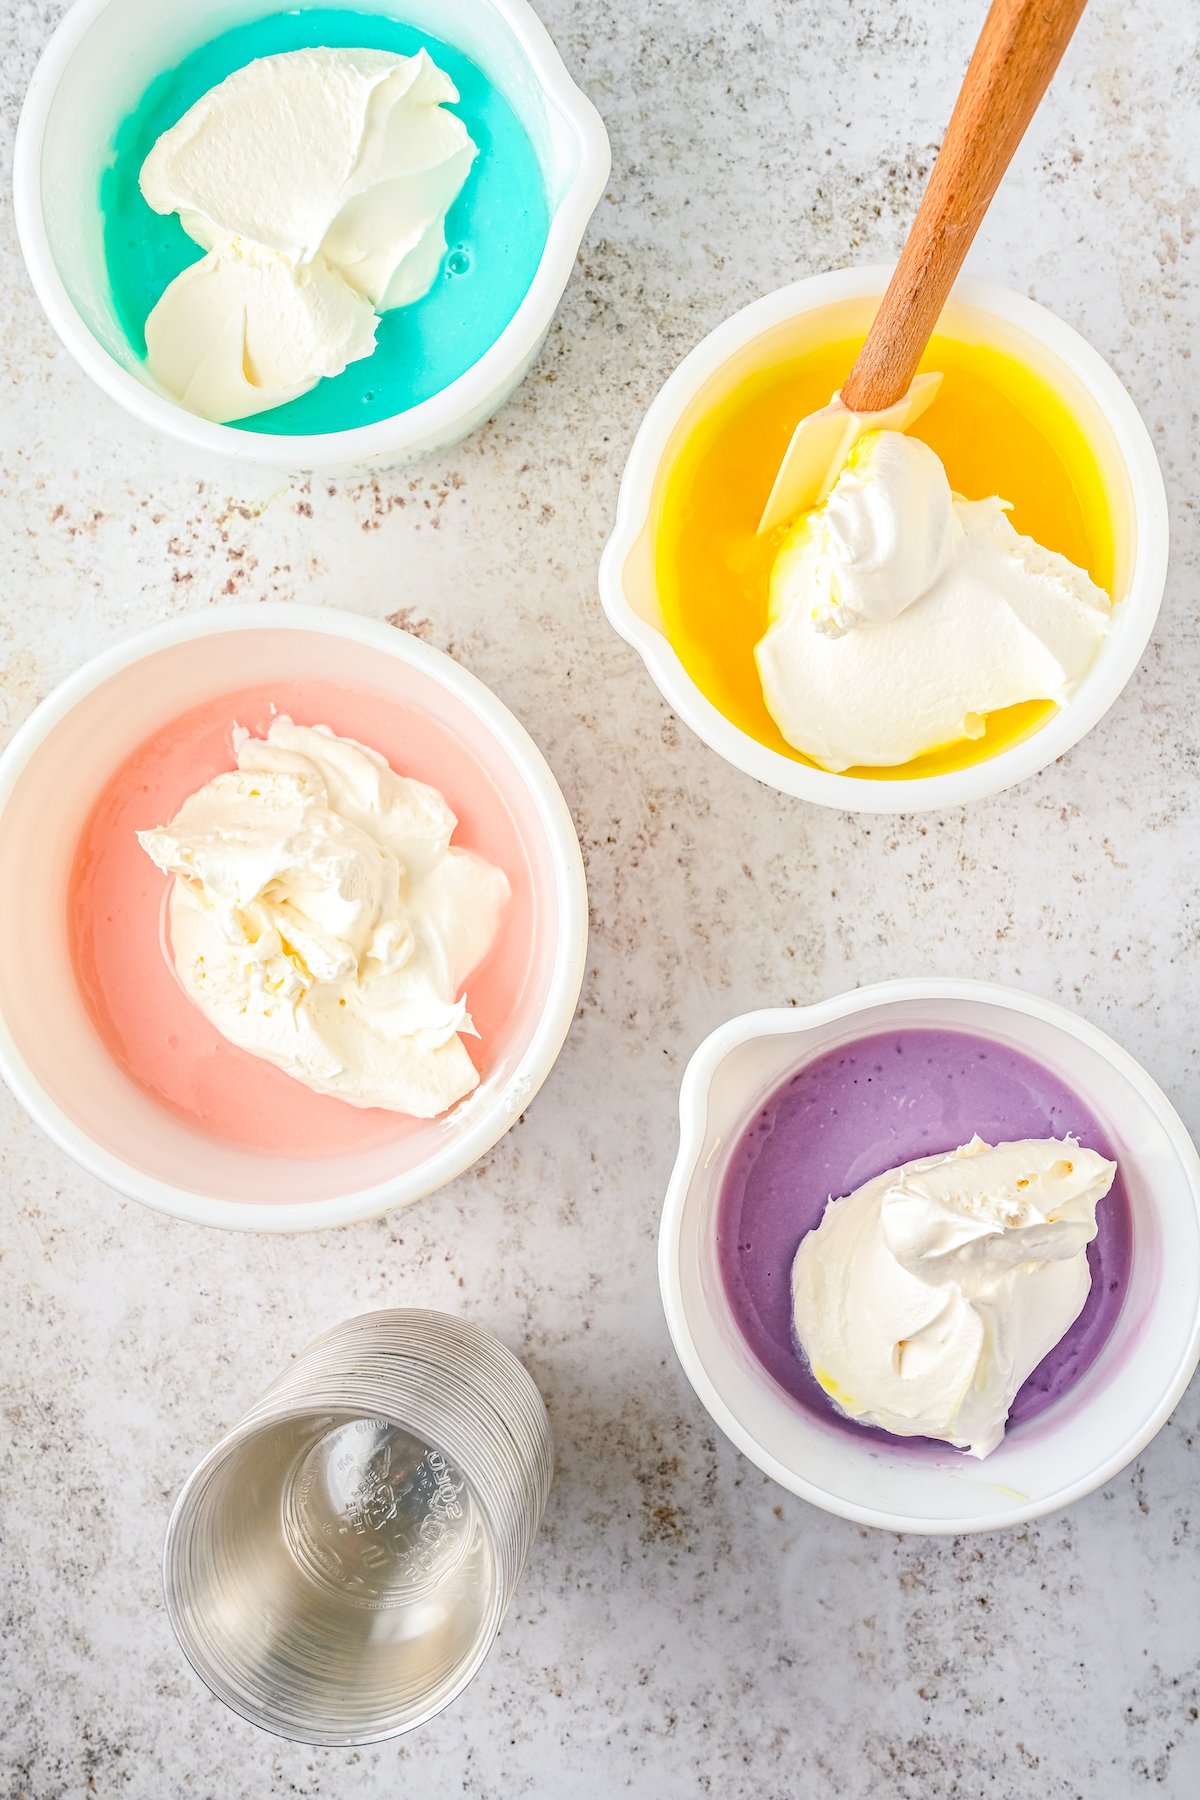 Stirring whipped cream into different colored bowls of Jello.